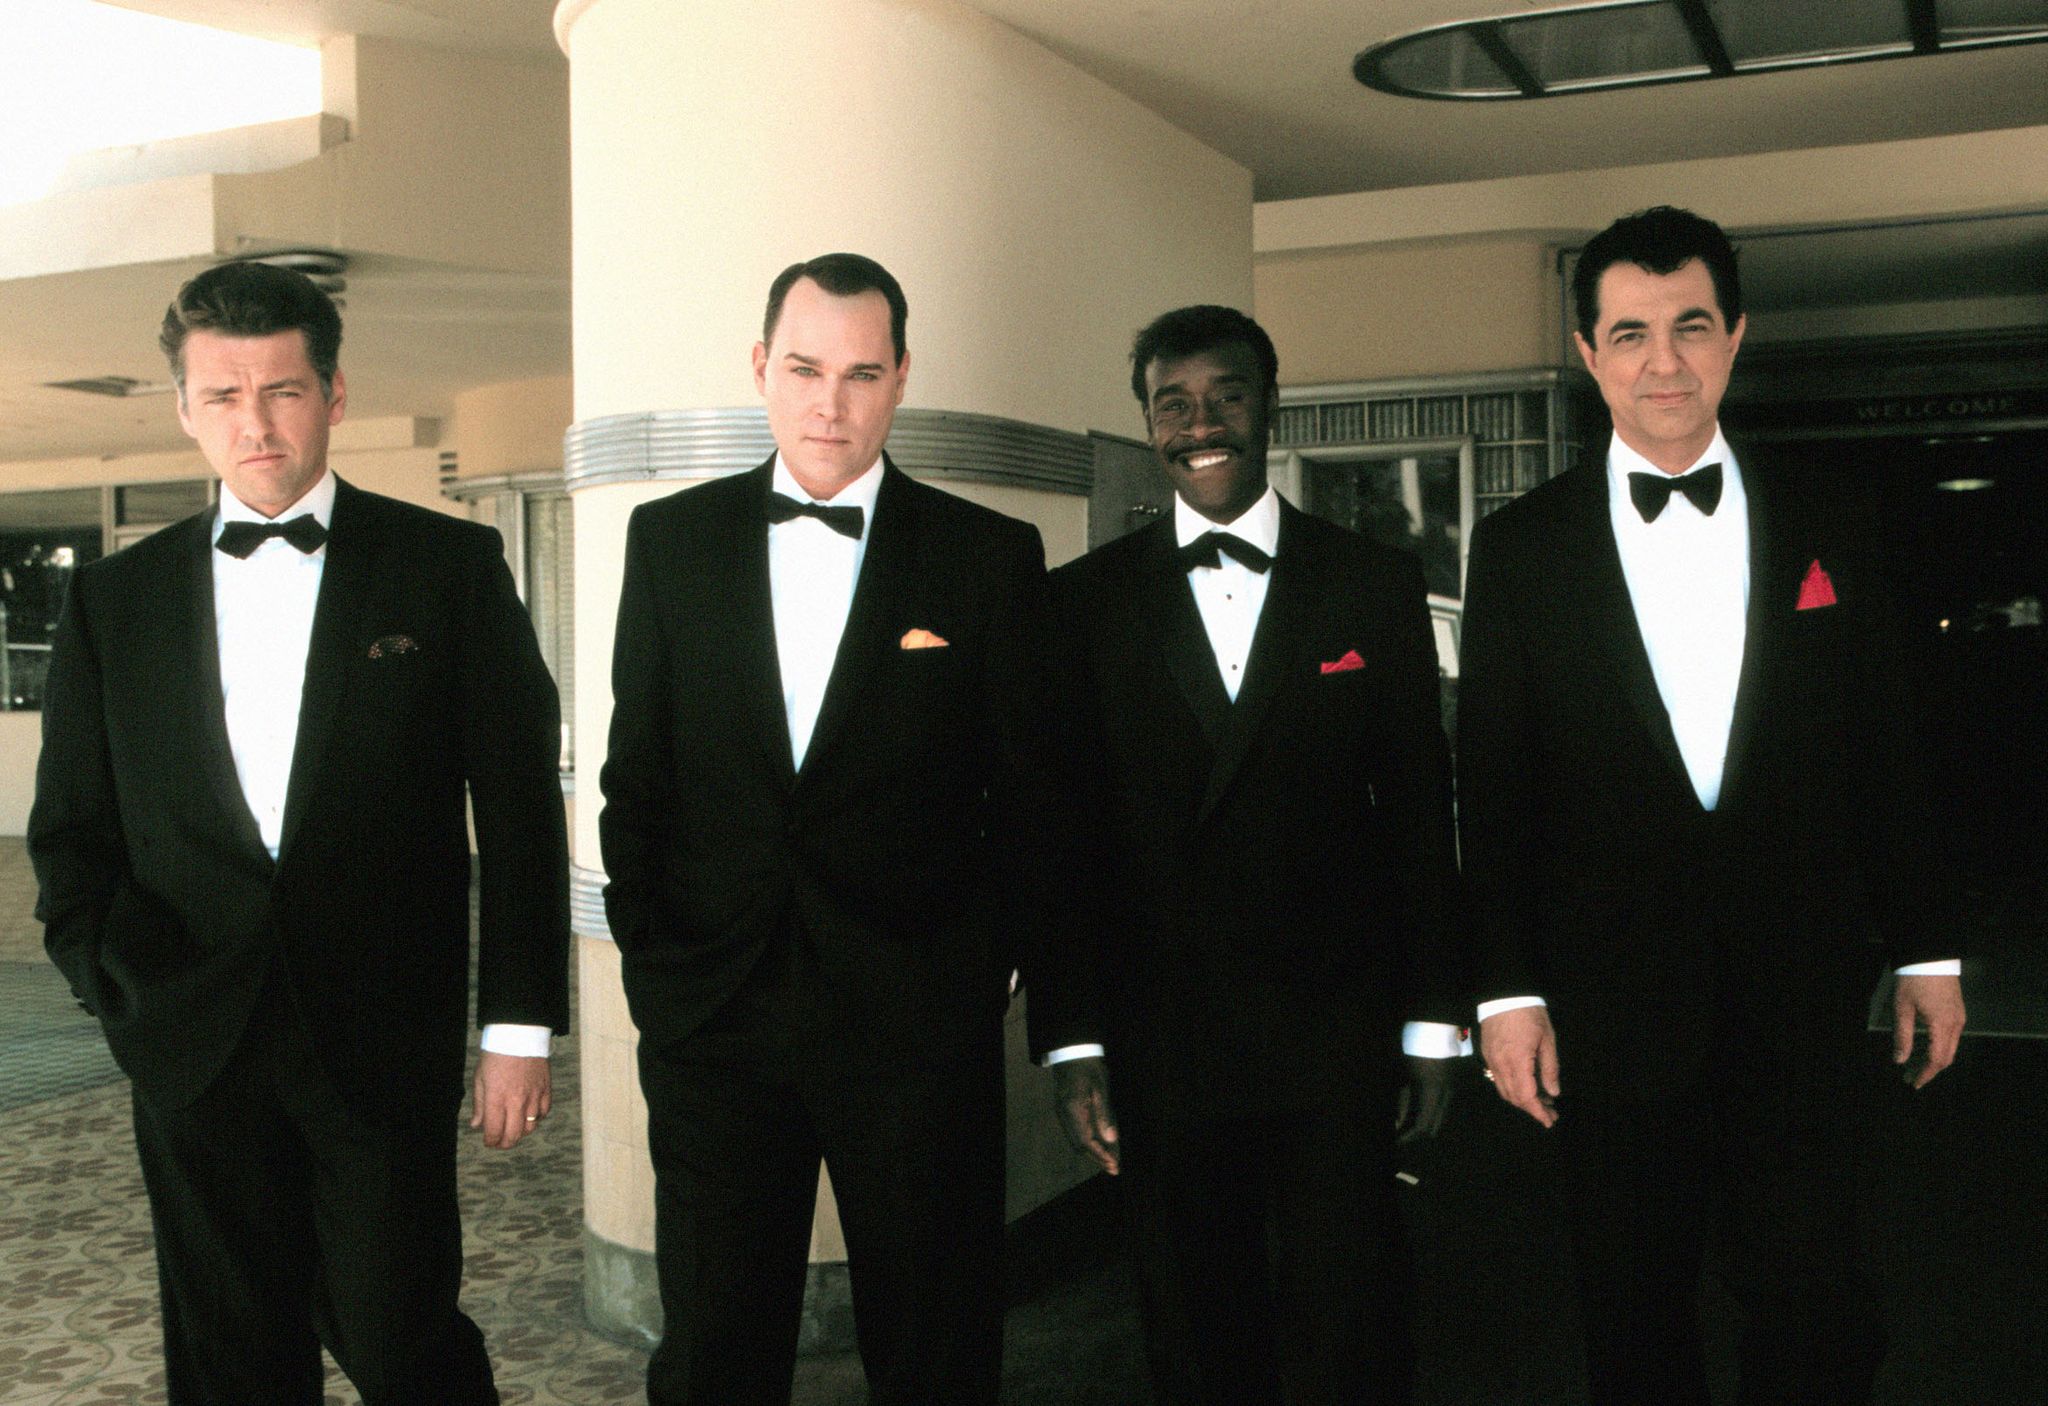 editorial use only no book cover usage mandatory credit photo by stephen vaughanhbooriginal filmkobalshutterstock 5880935h angus mcfadyen, ray liotta, don cheadle, joe mantegna the rat pack 1998 director rob cohen hbooriginal film usa television comedy